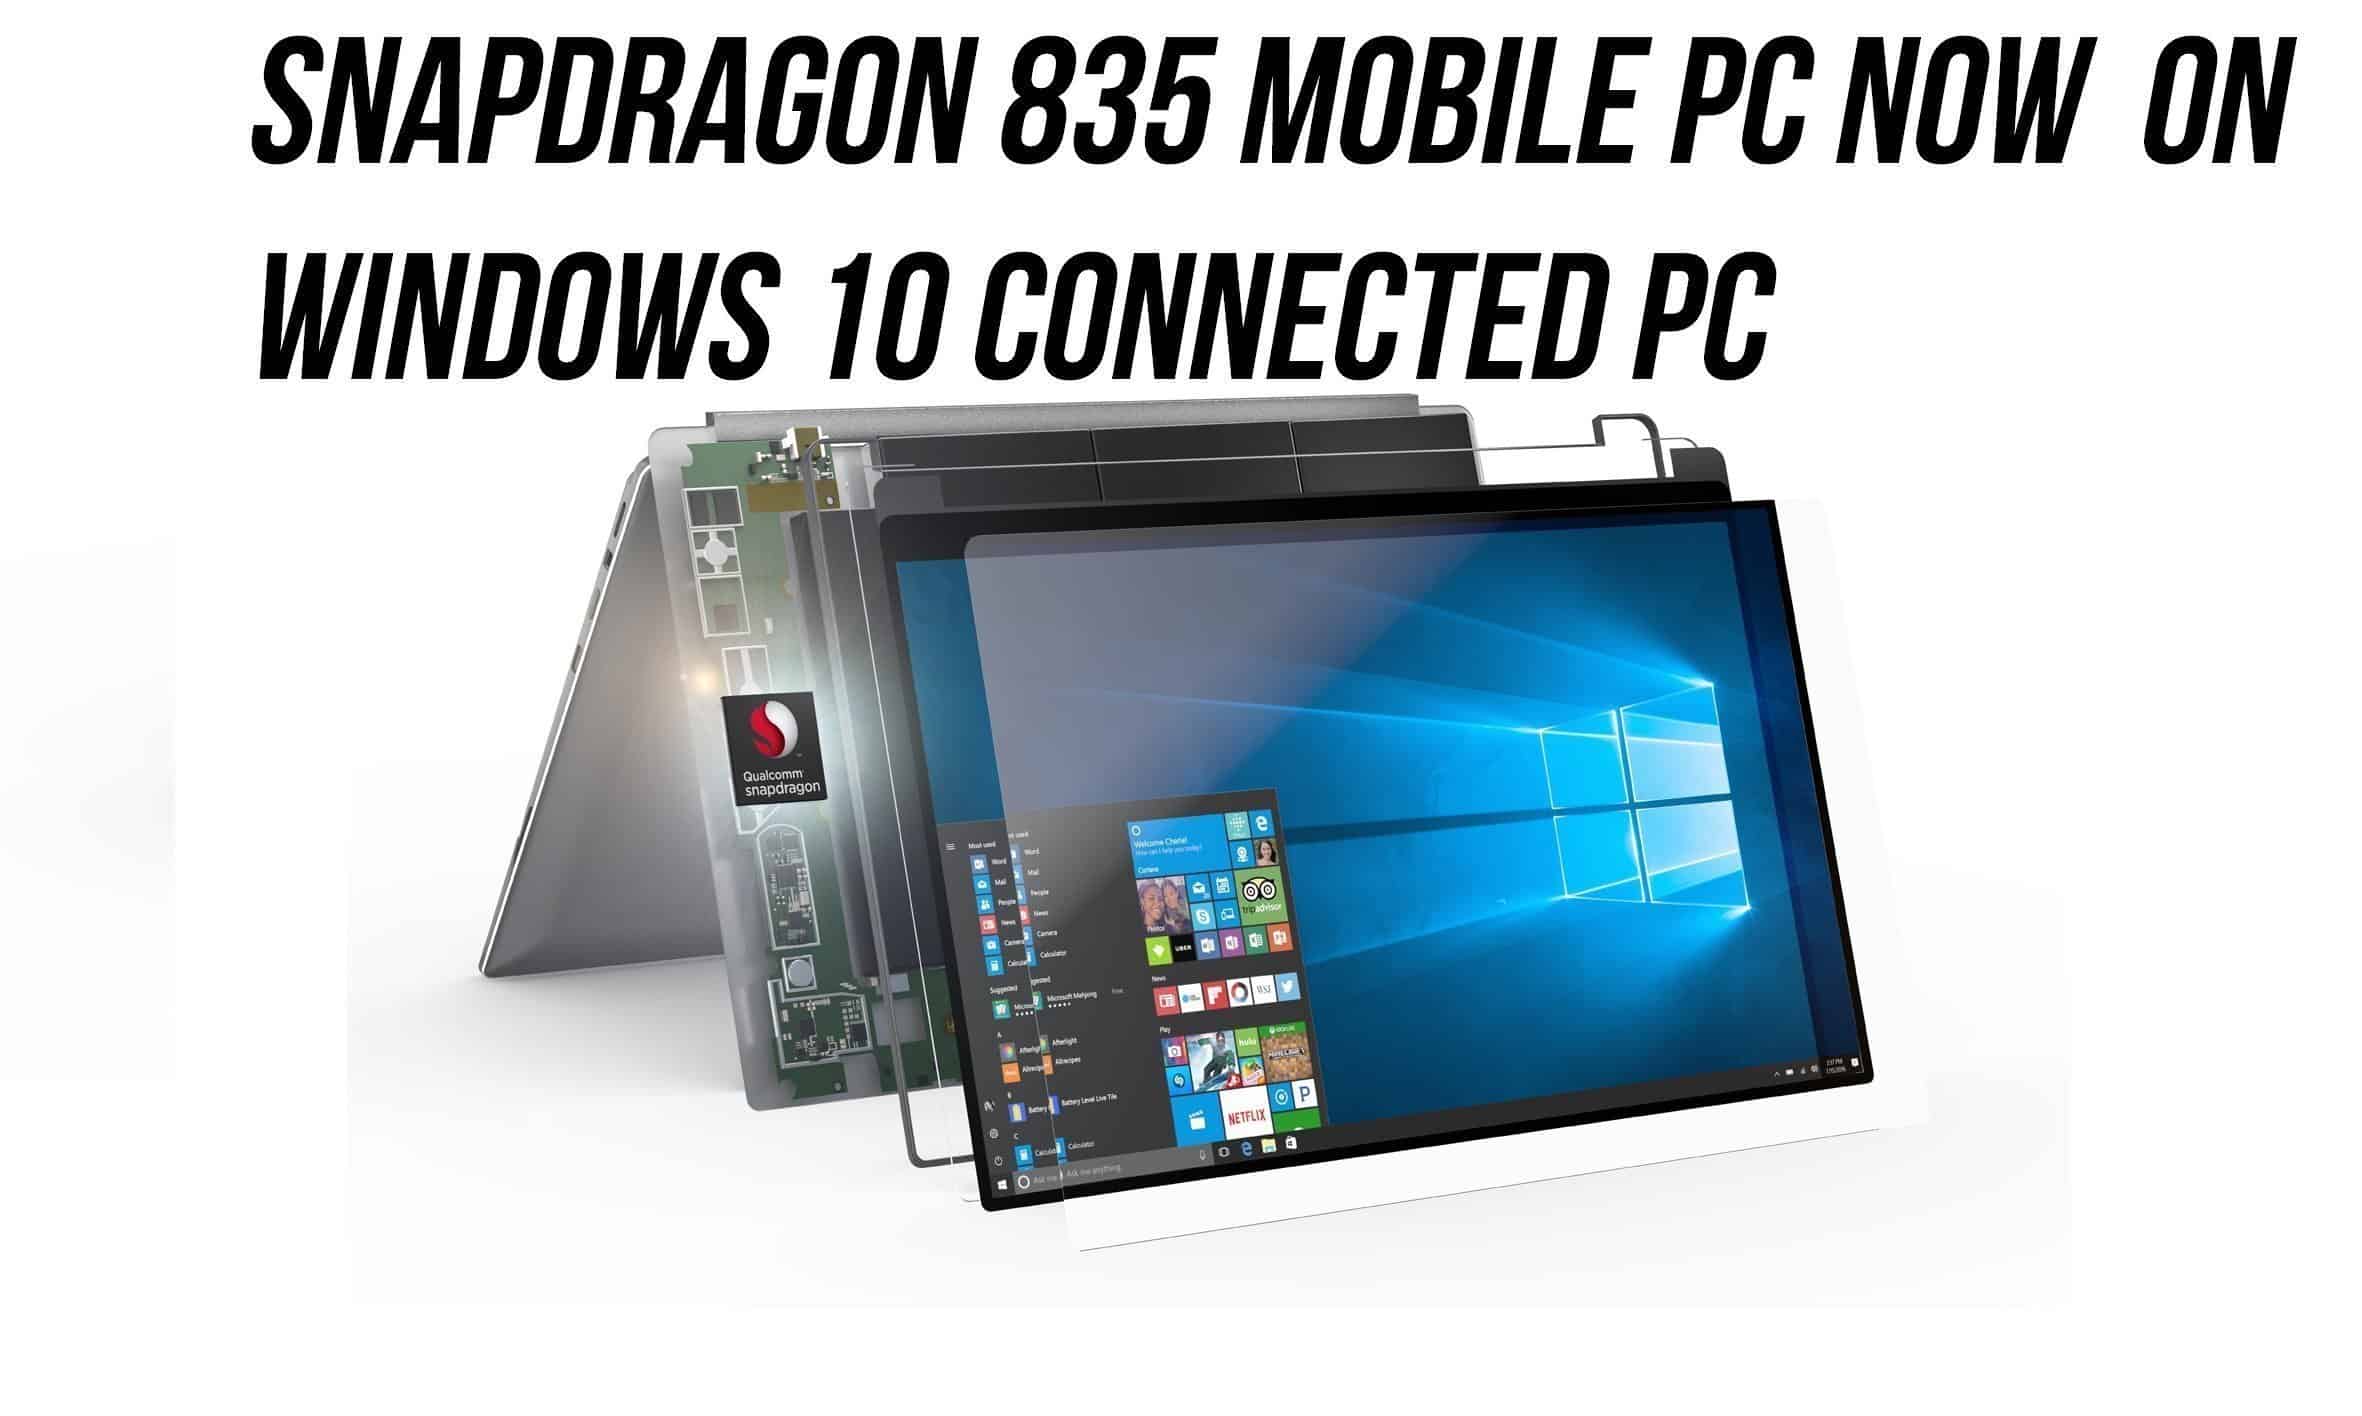 Qualcomm Launches Snapdragon 835 Mobile PC Powered Always Connected PC